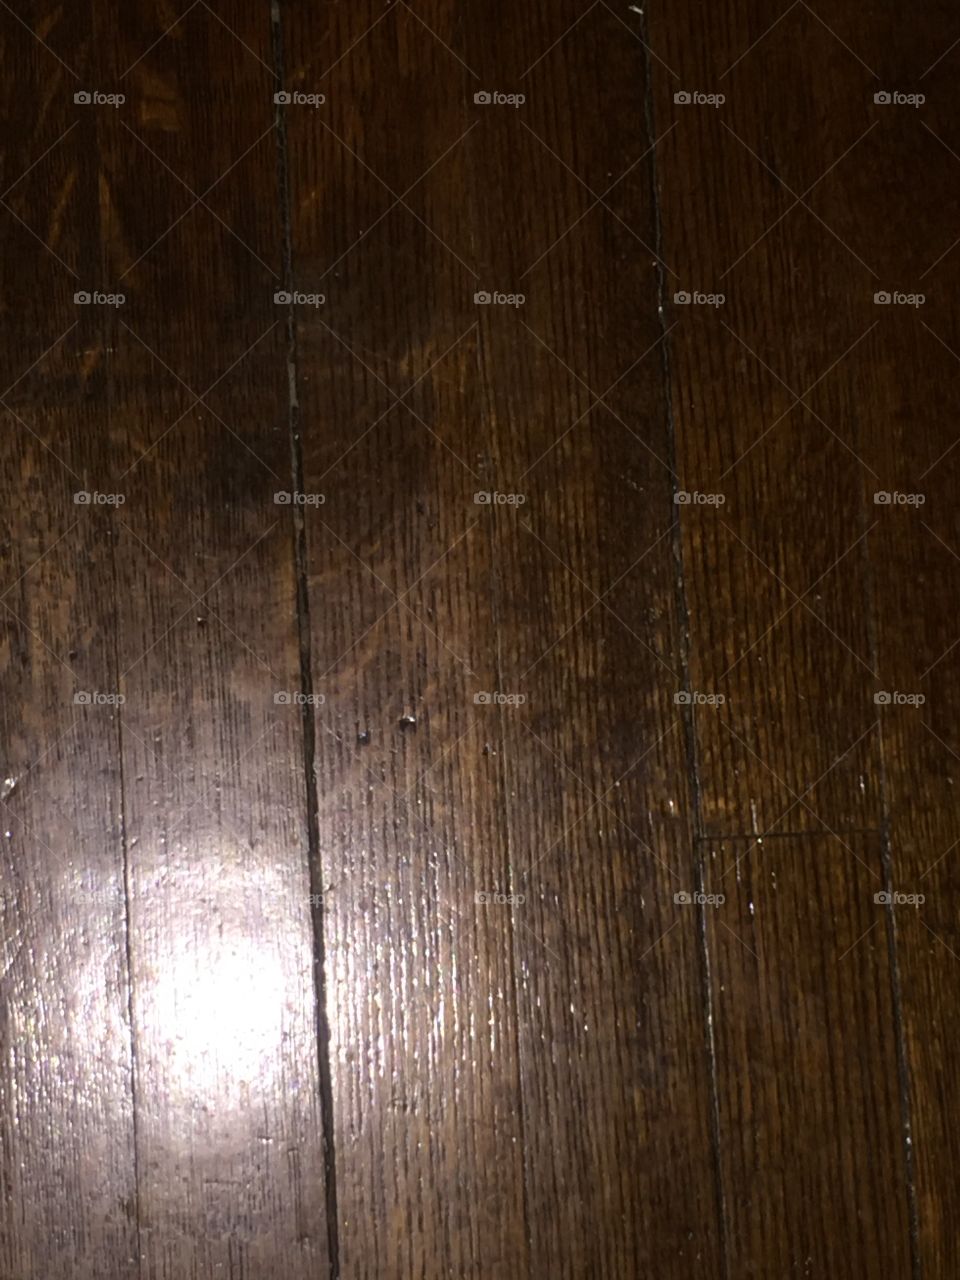 Just an up close pic of a wood floor